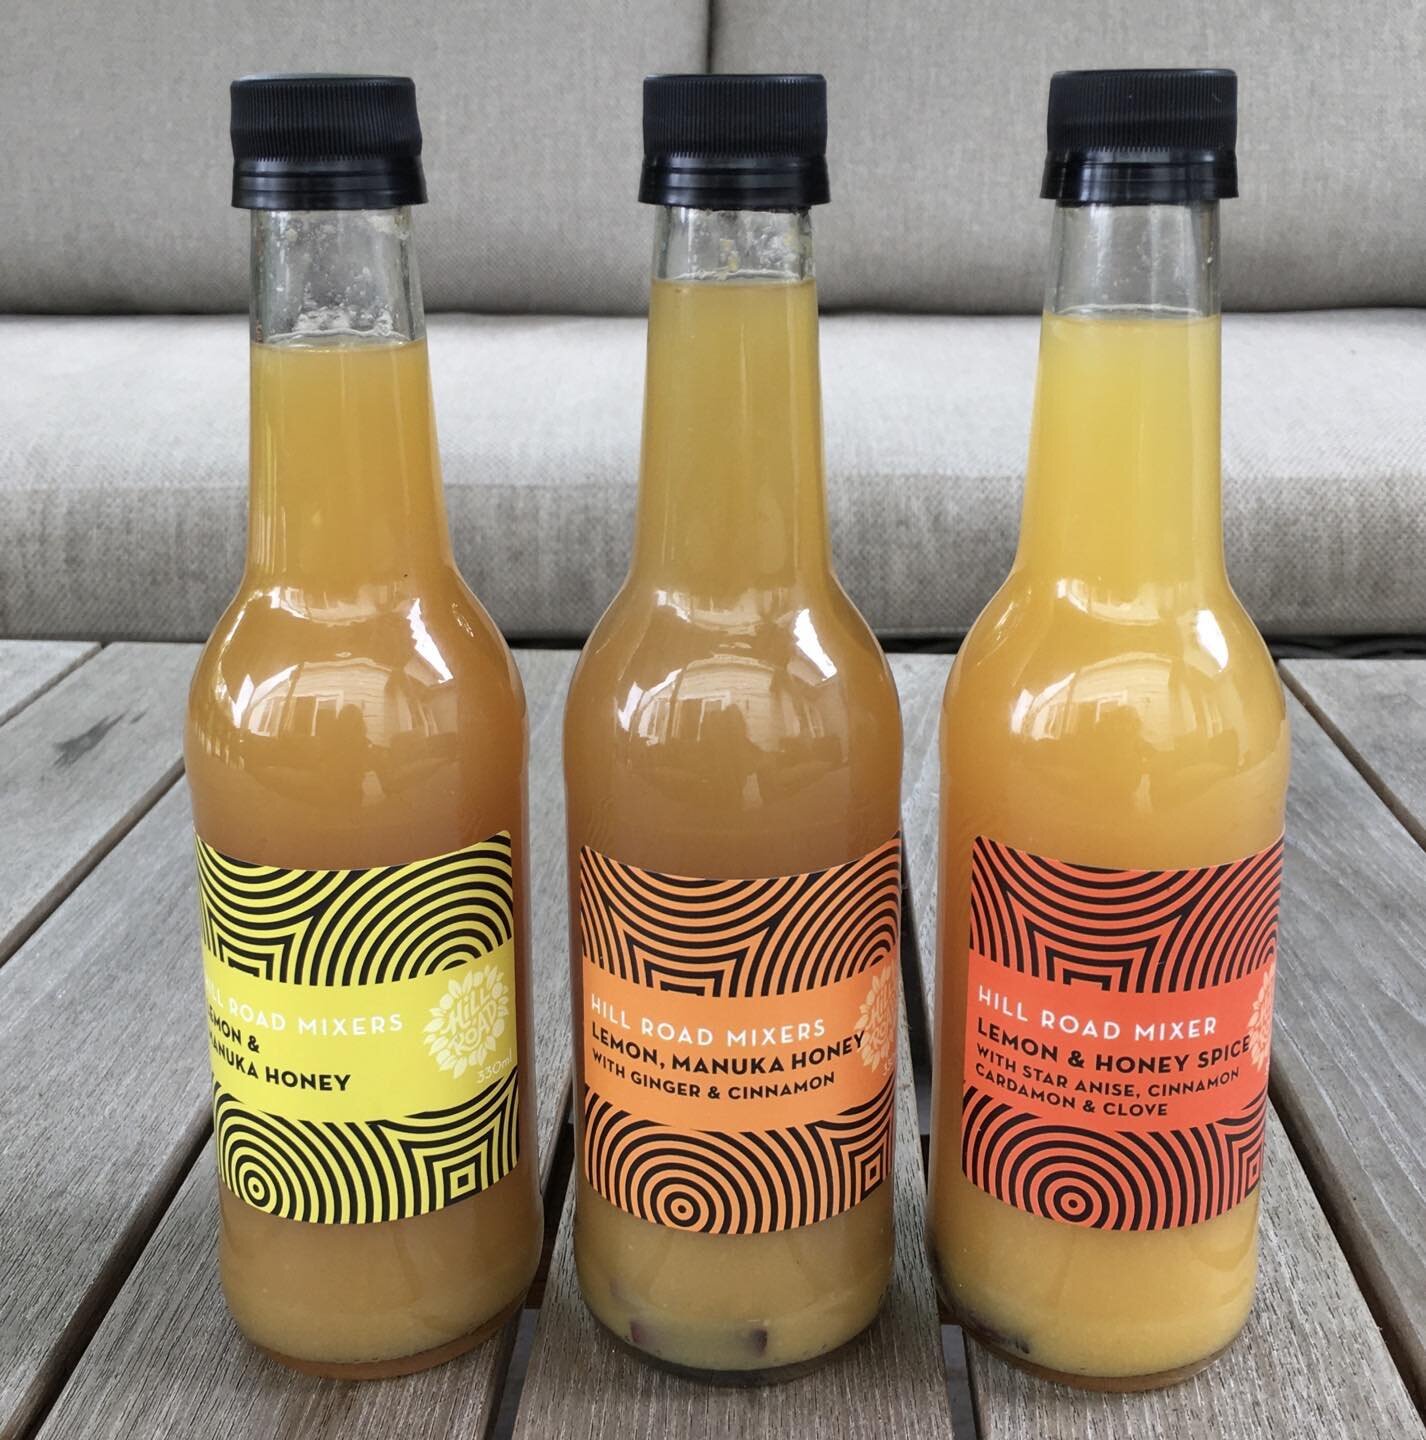 A summery citrus range of mixer drink labels for Hill Road Orchard recently.
🍊🍋